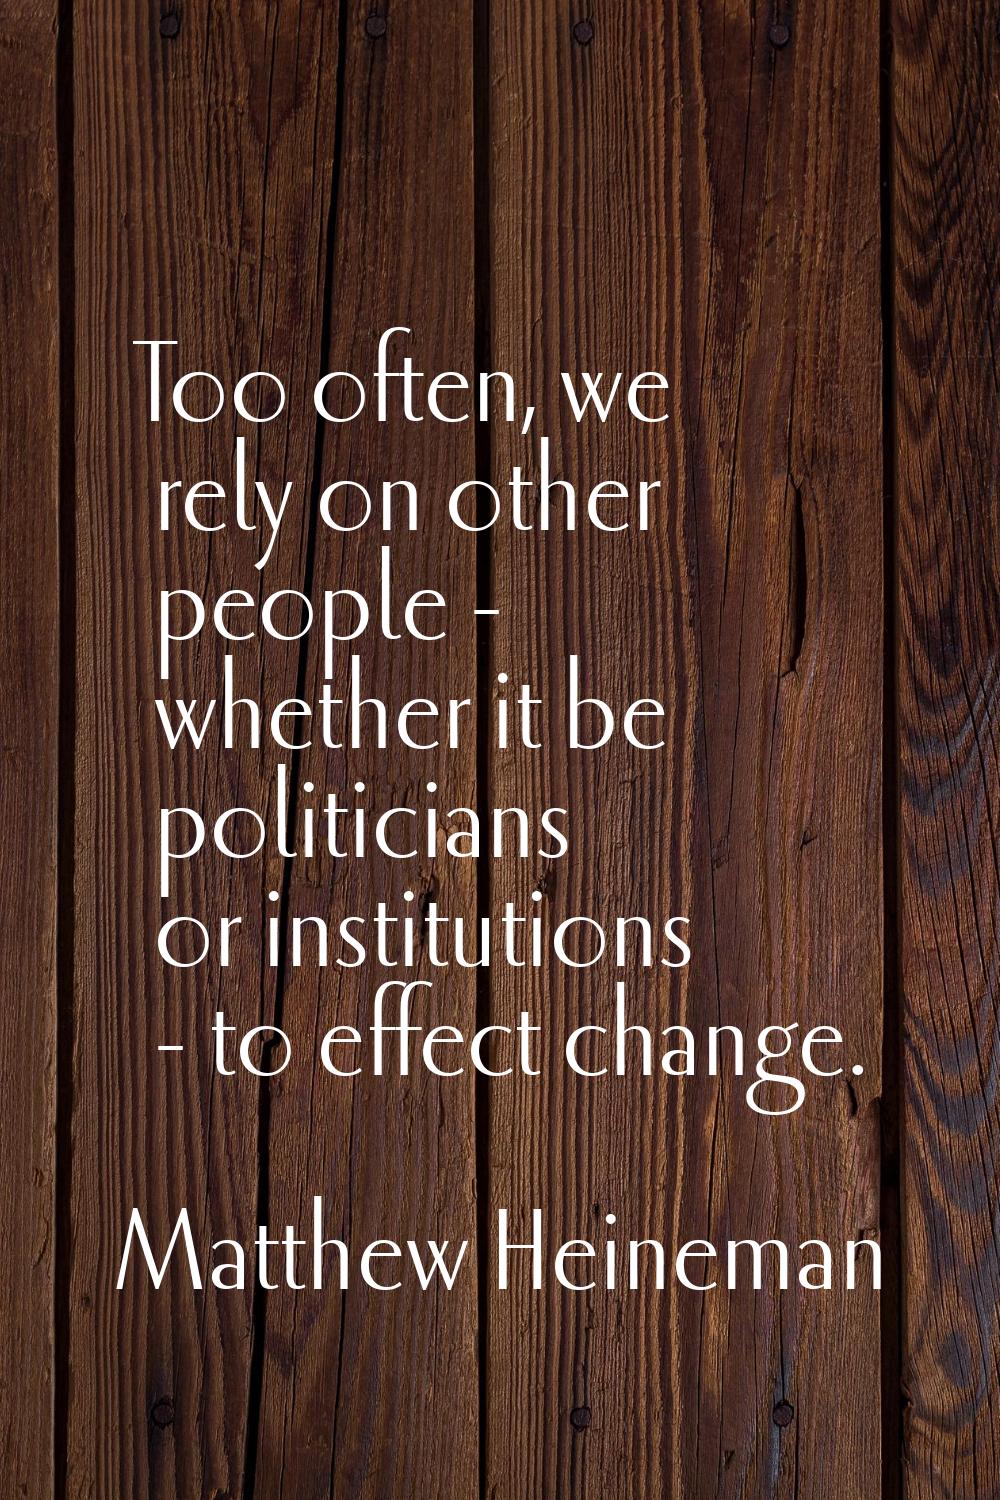 Too often, we rely on other people - whether it be politicians or institutions - to effect change.